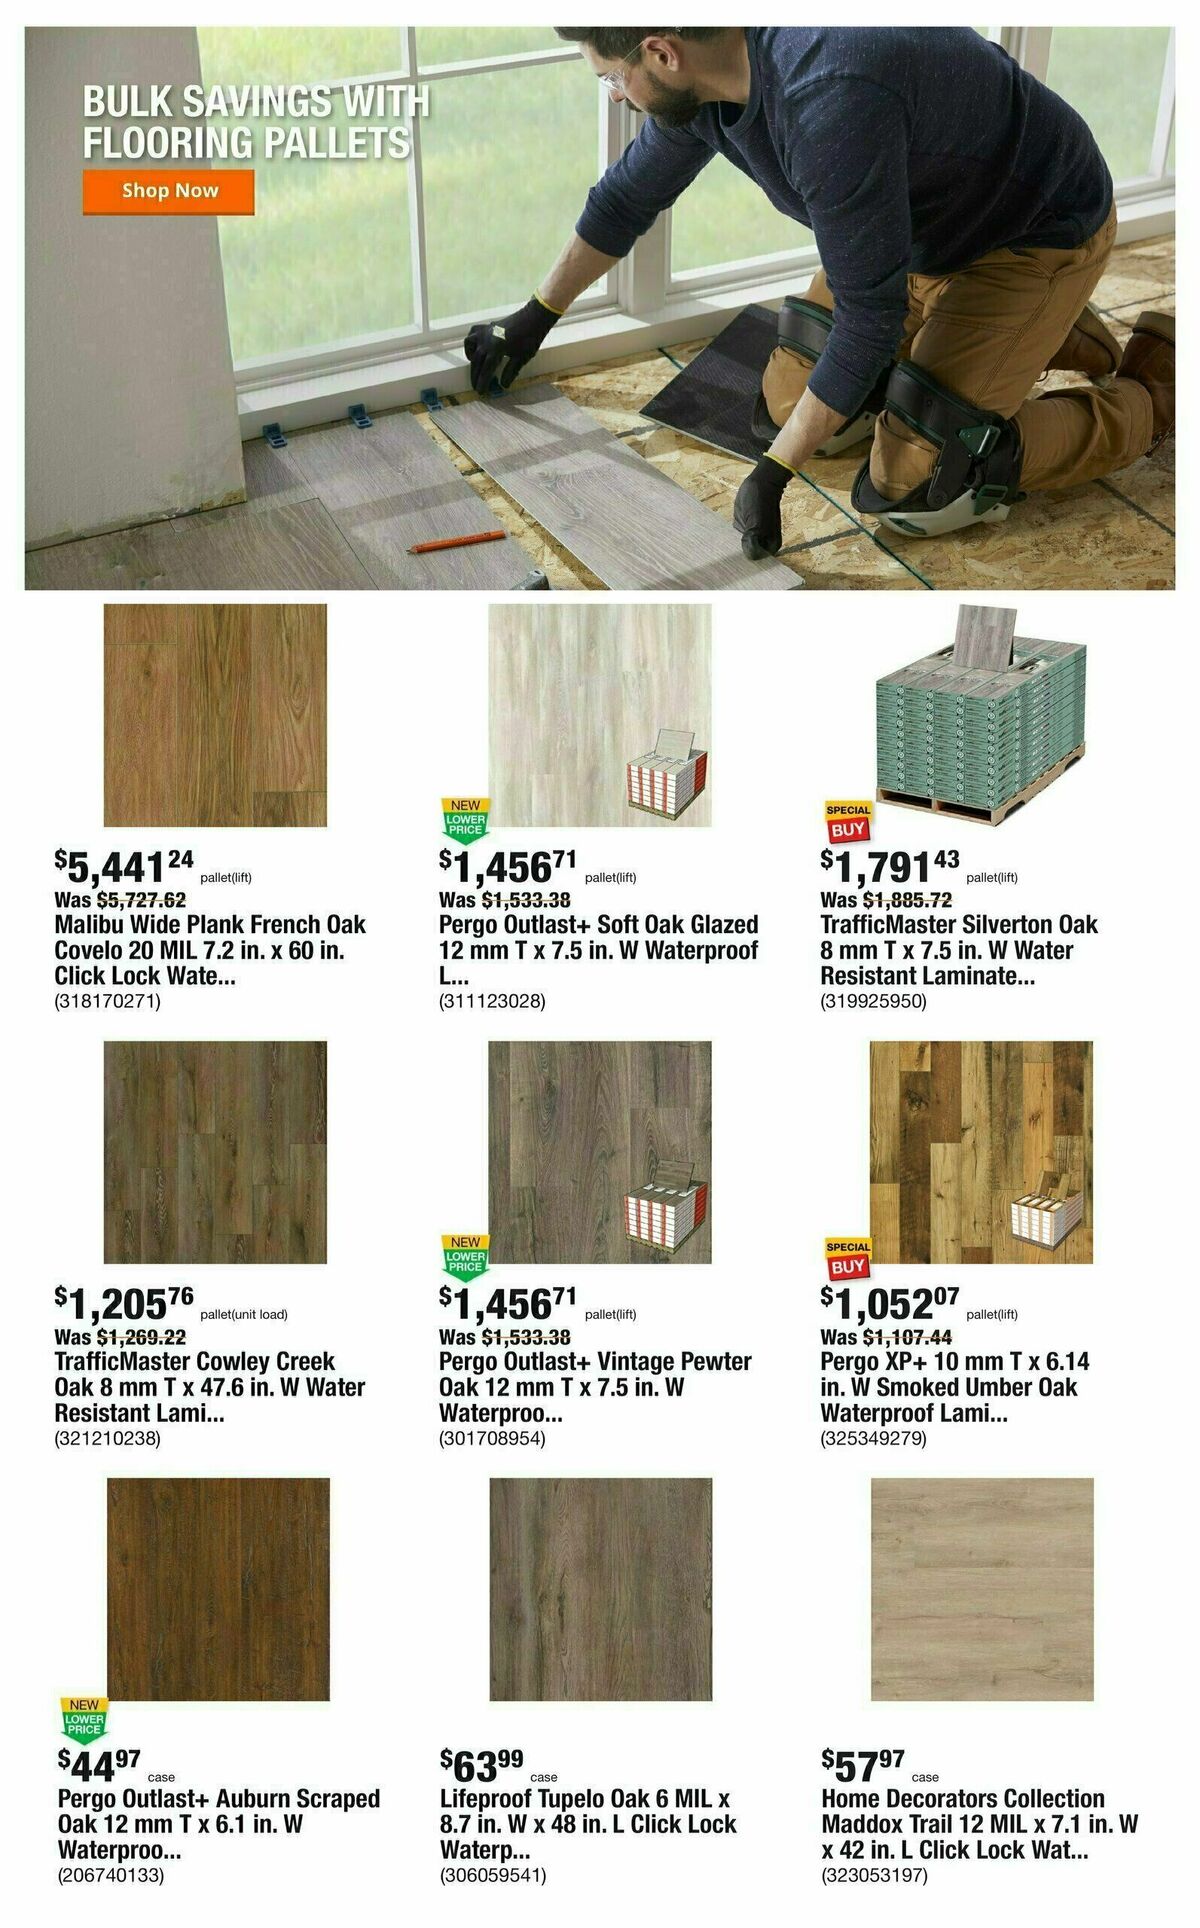 The Home Depot PRO Weekly Ad from July 24